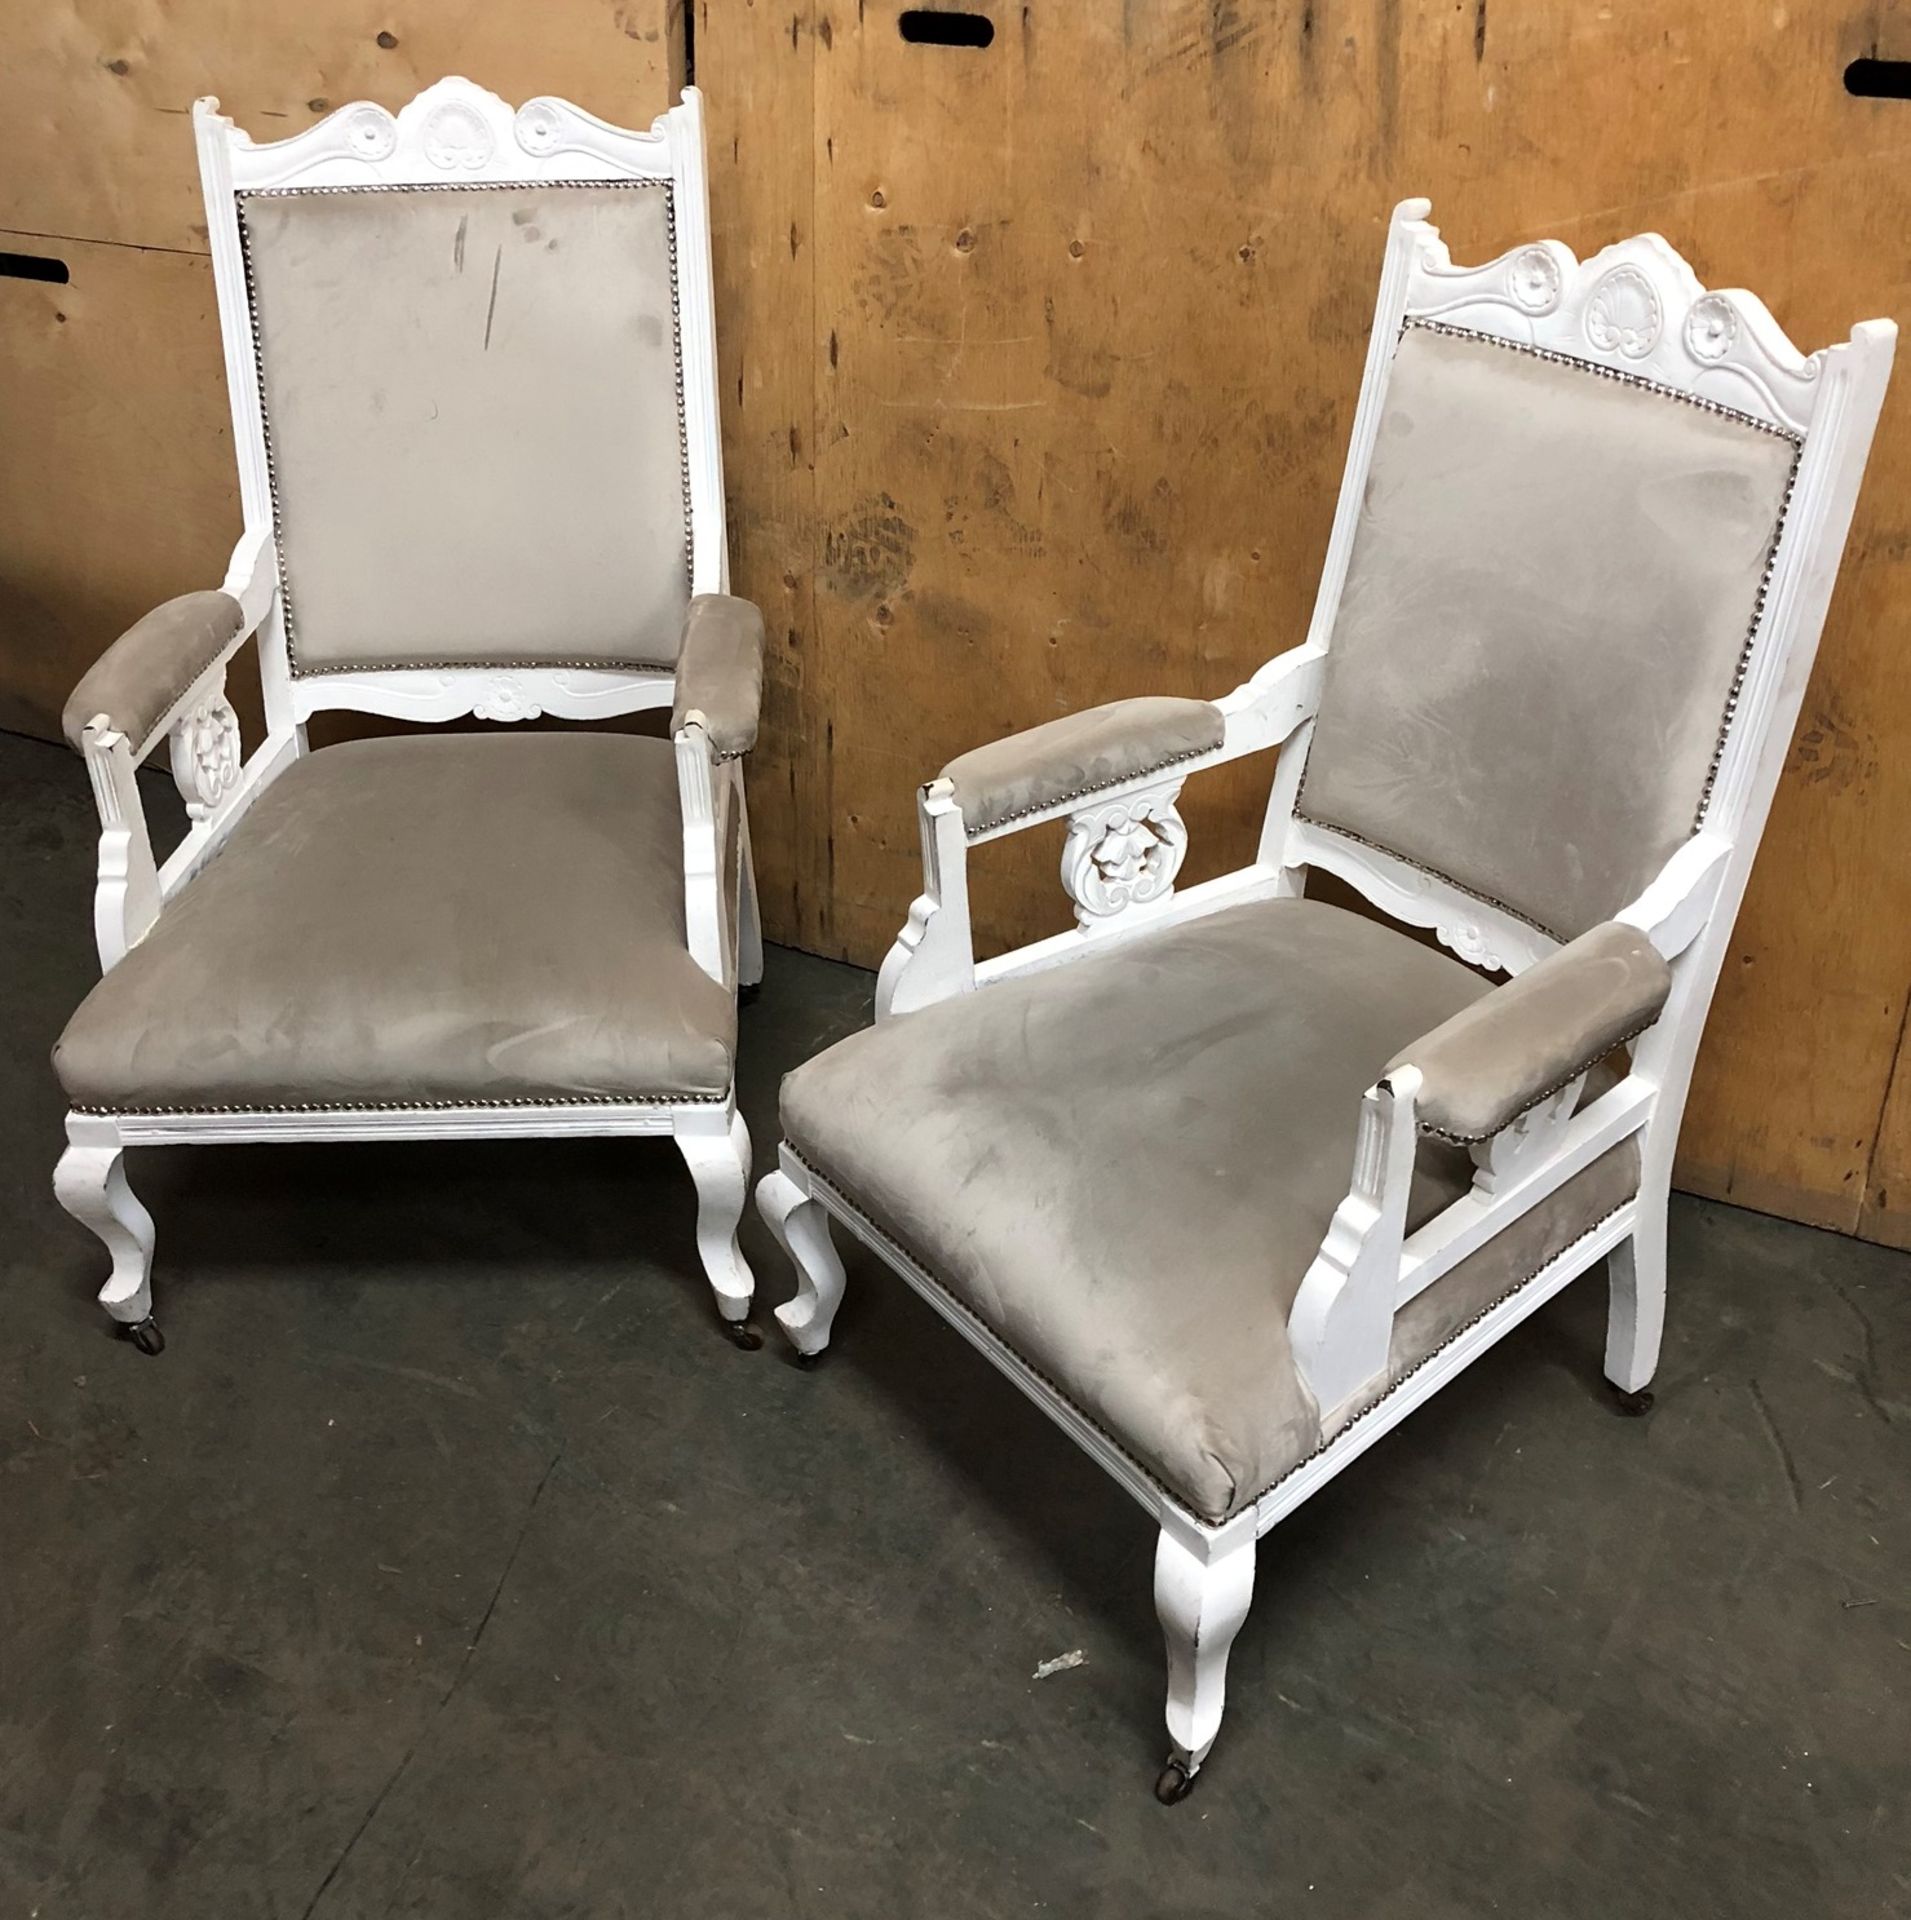 2 x Mobile Wooden Armchairs in Grey